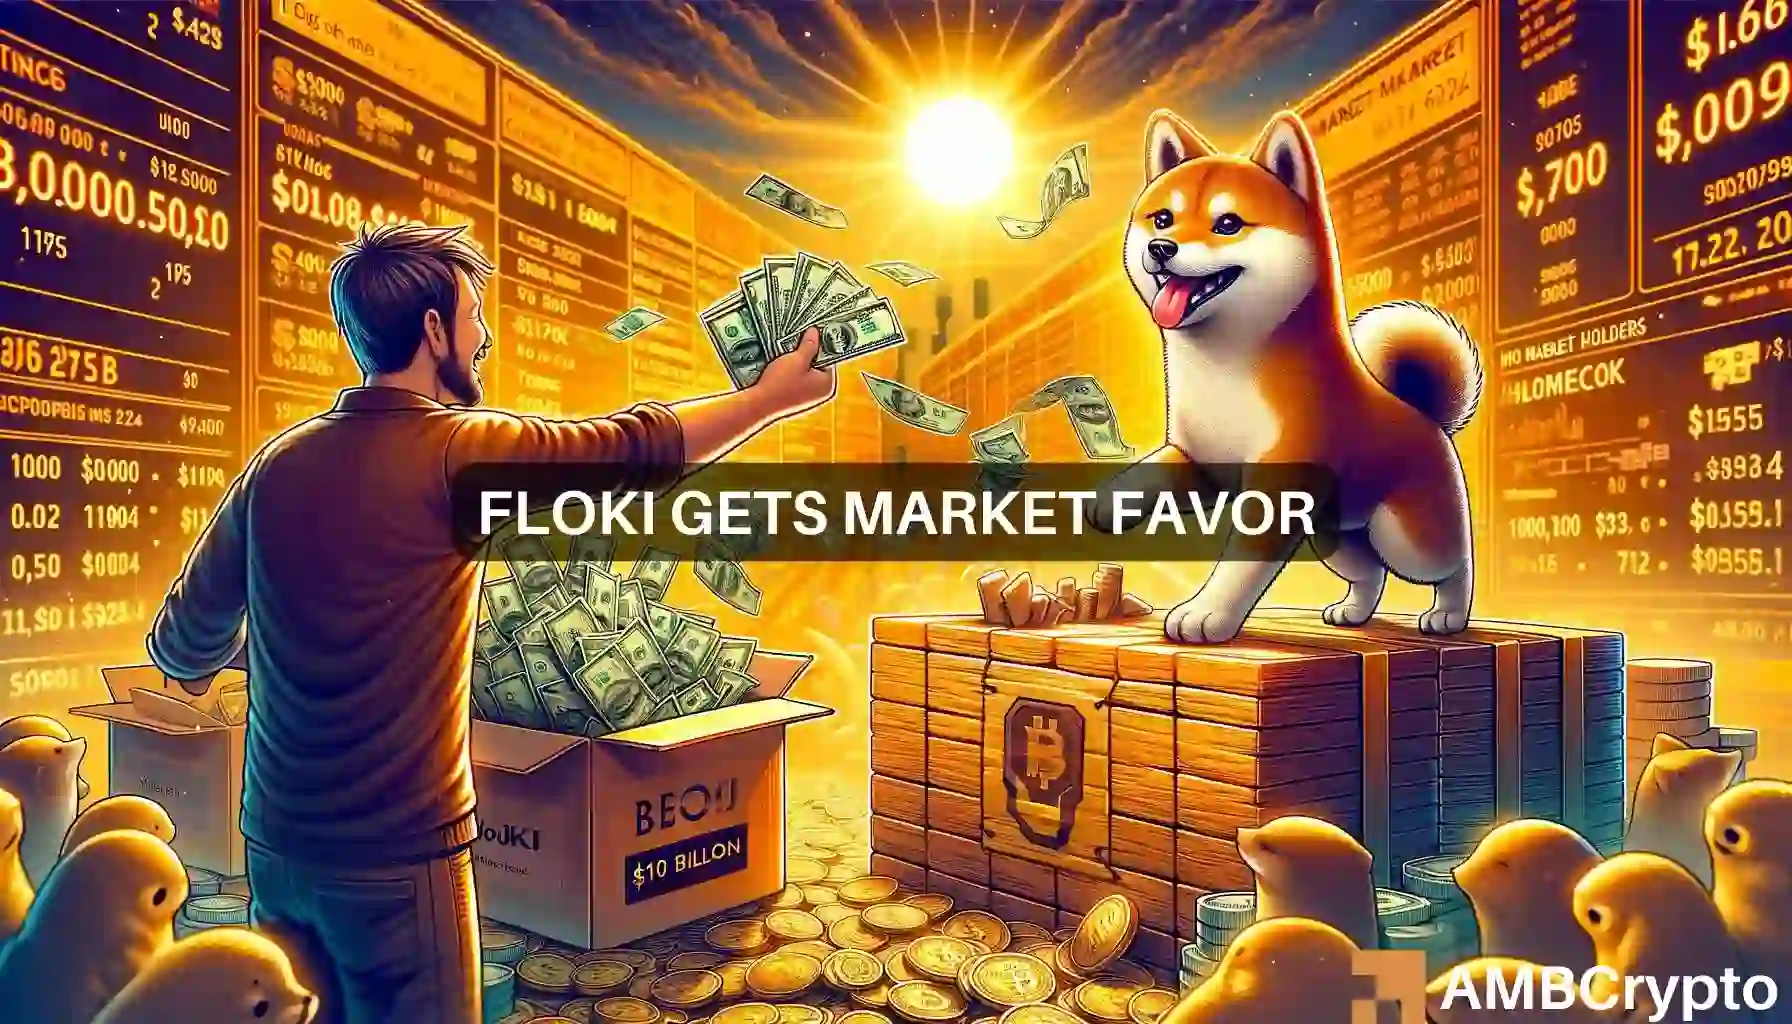 FLOKI: Will a $12M investment set the stage for a bull run?